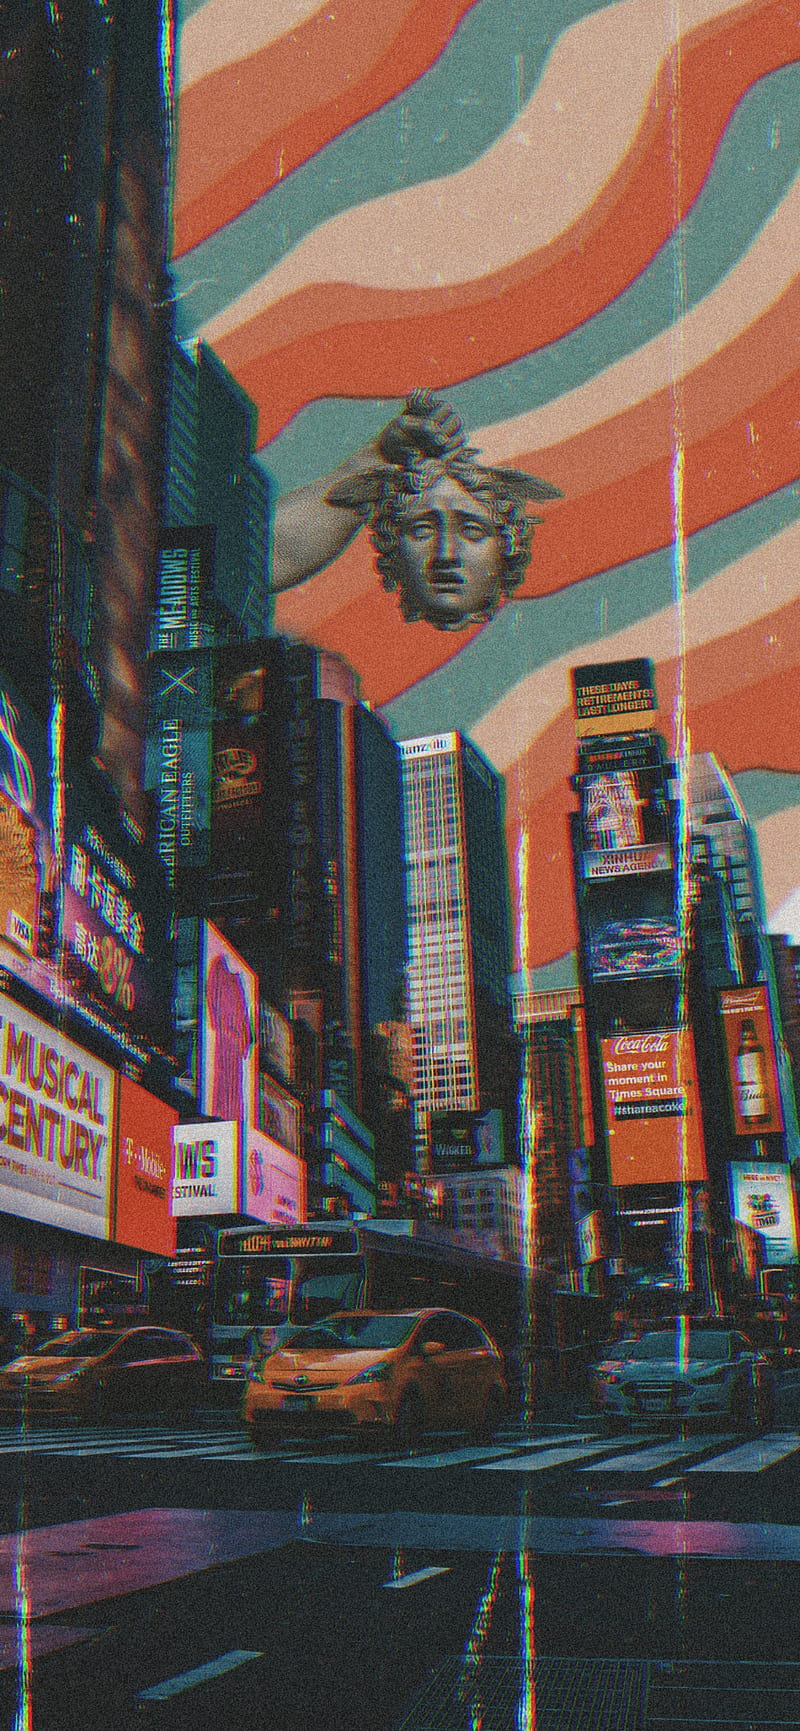 100+] New York Aesthetic Wallpapers | Wallpapers.com